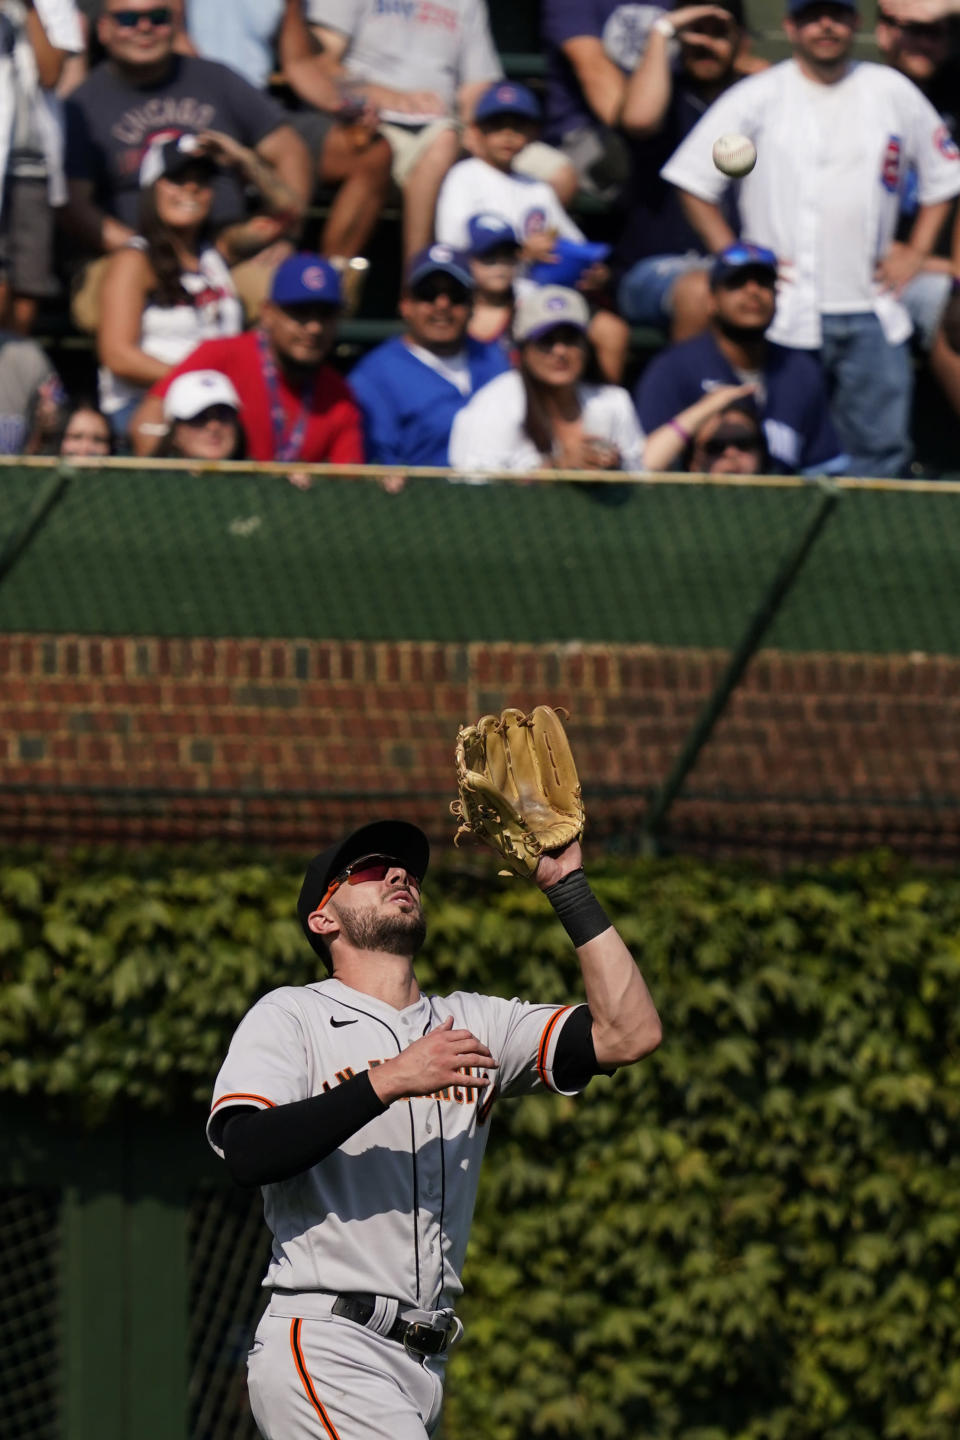 San Francisco Giants left fielder Kris Bryant catches a fly ball hit by Chicago Cubs' Ian Happ during the sixth inning of a baseball game in Chicago, Friday, Sept. 10, 2021. (AP Photo/Nam Y. Huh)